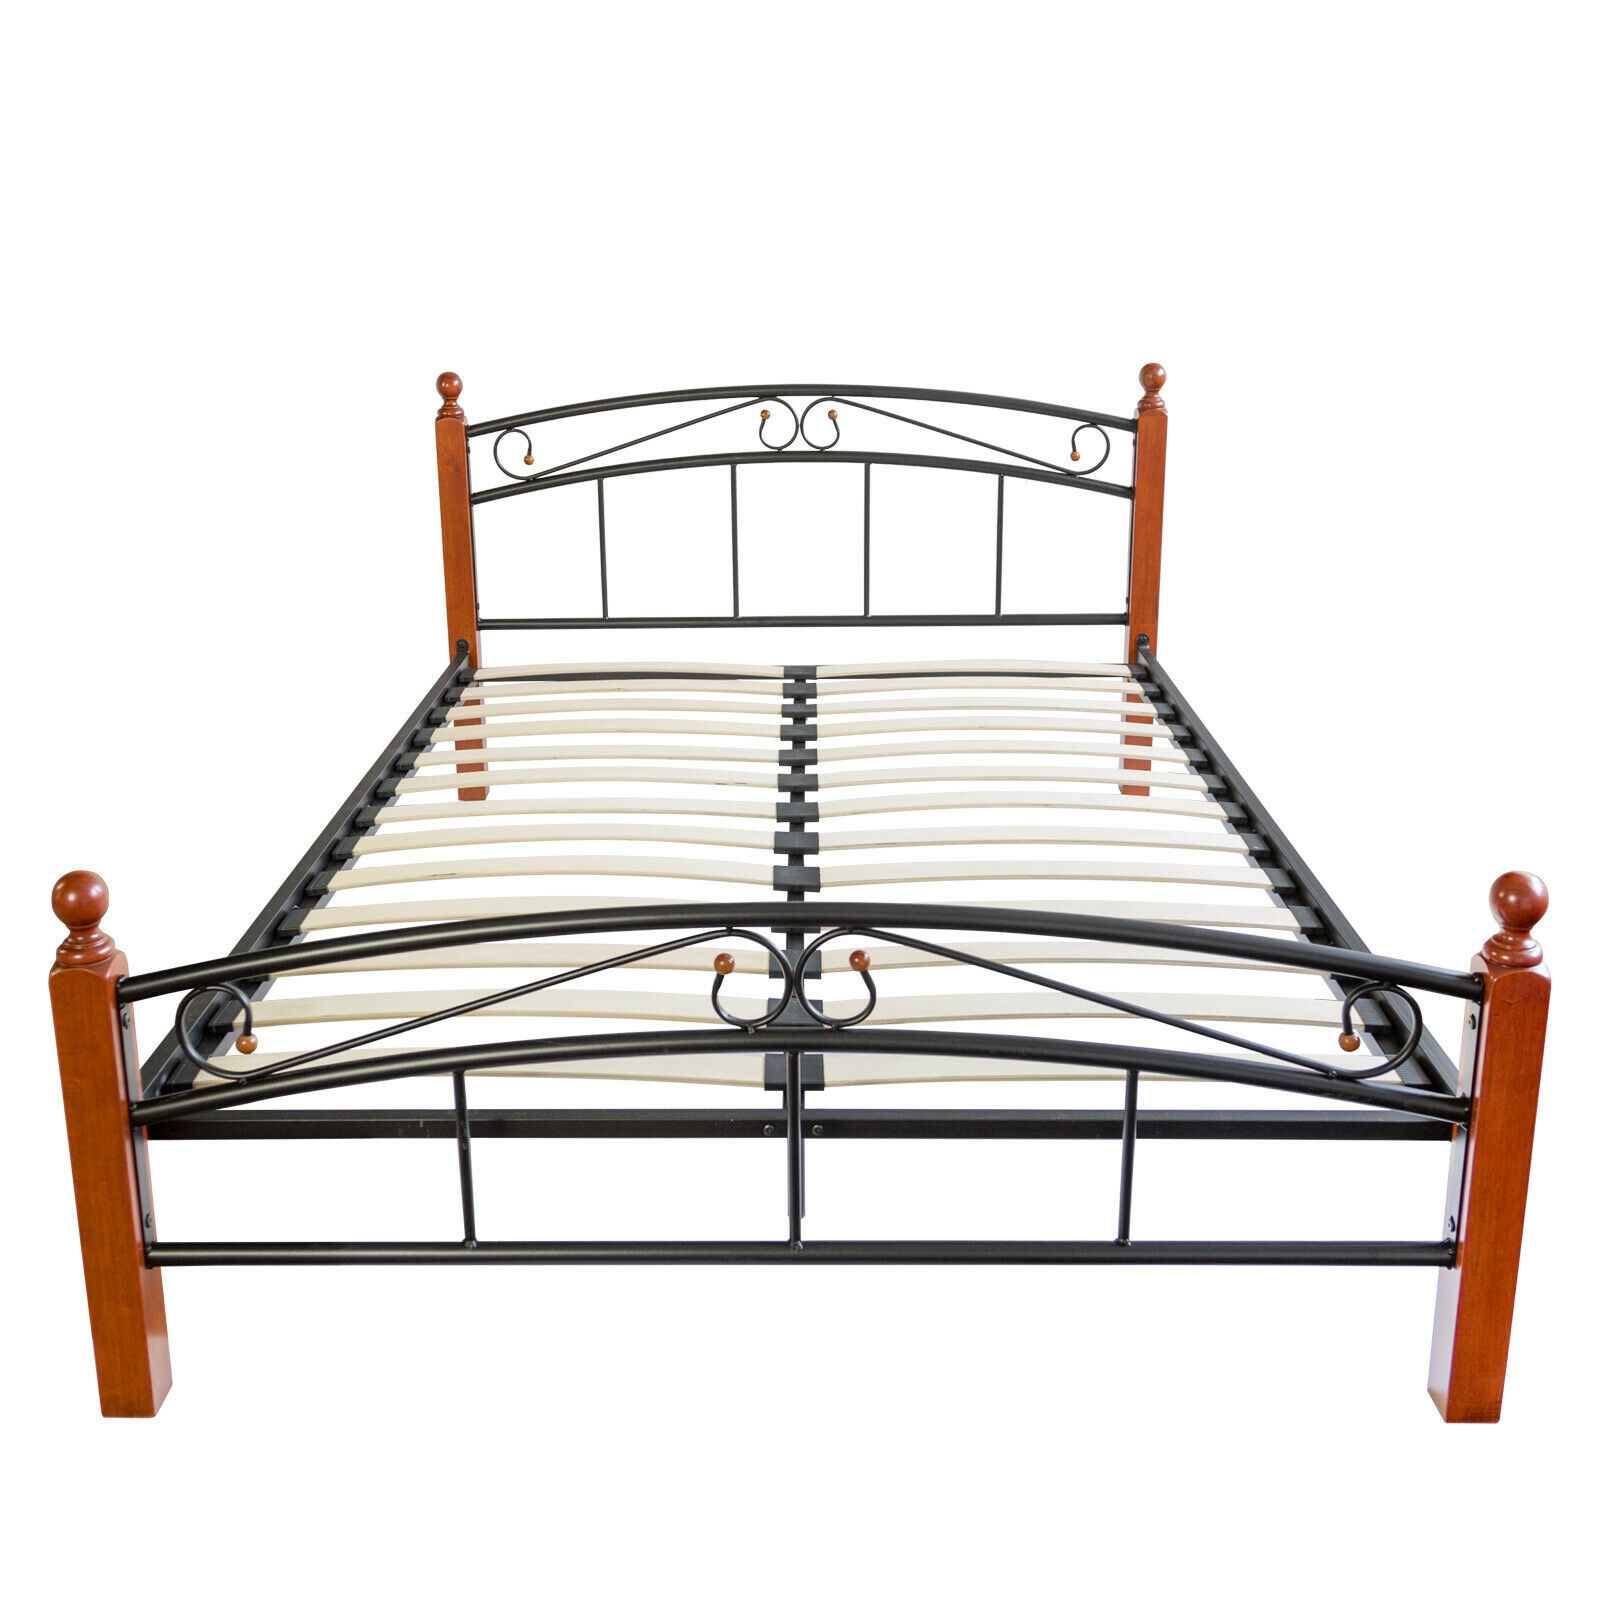 Metal Bed Iron Bed Double 180 x 200 Wood Slatted black brown bed frame